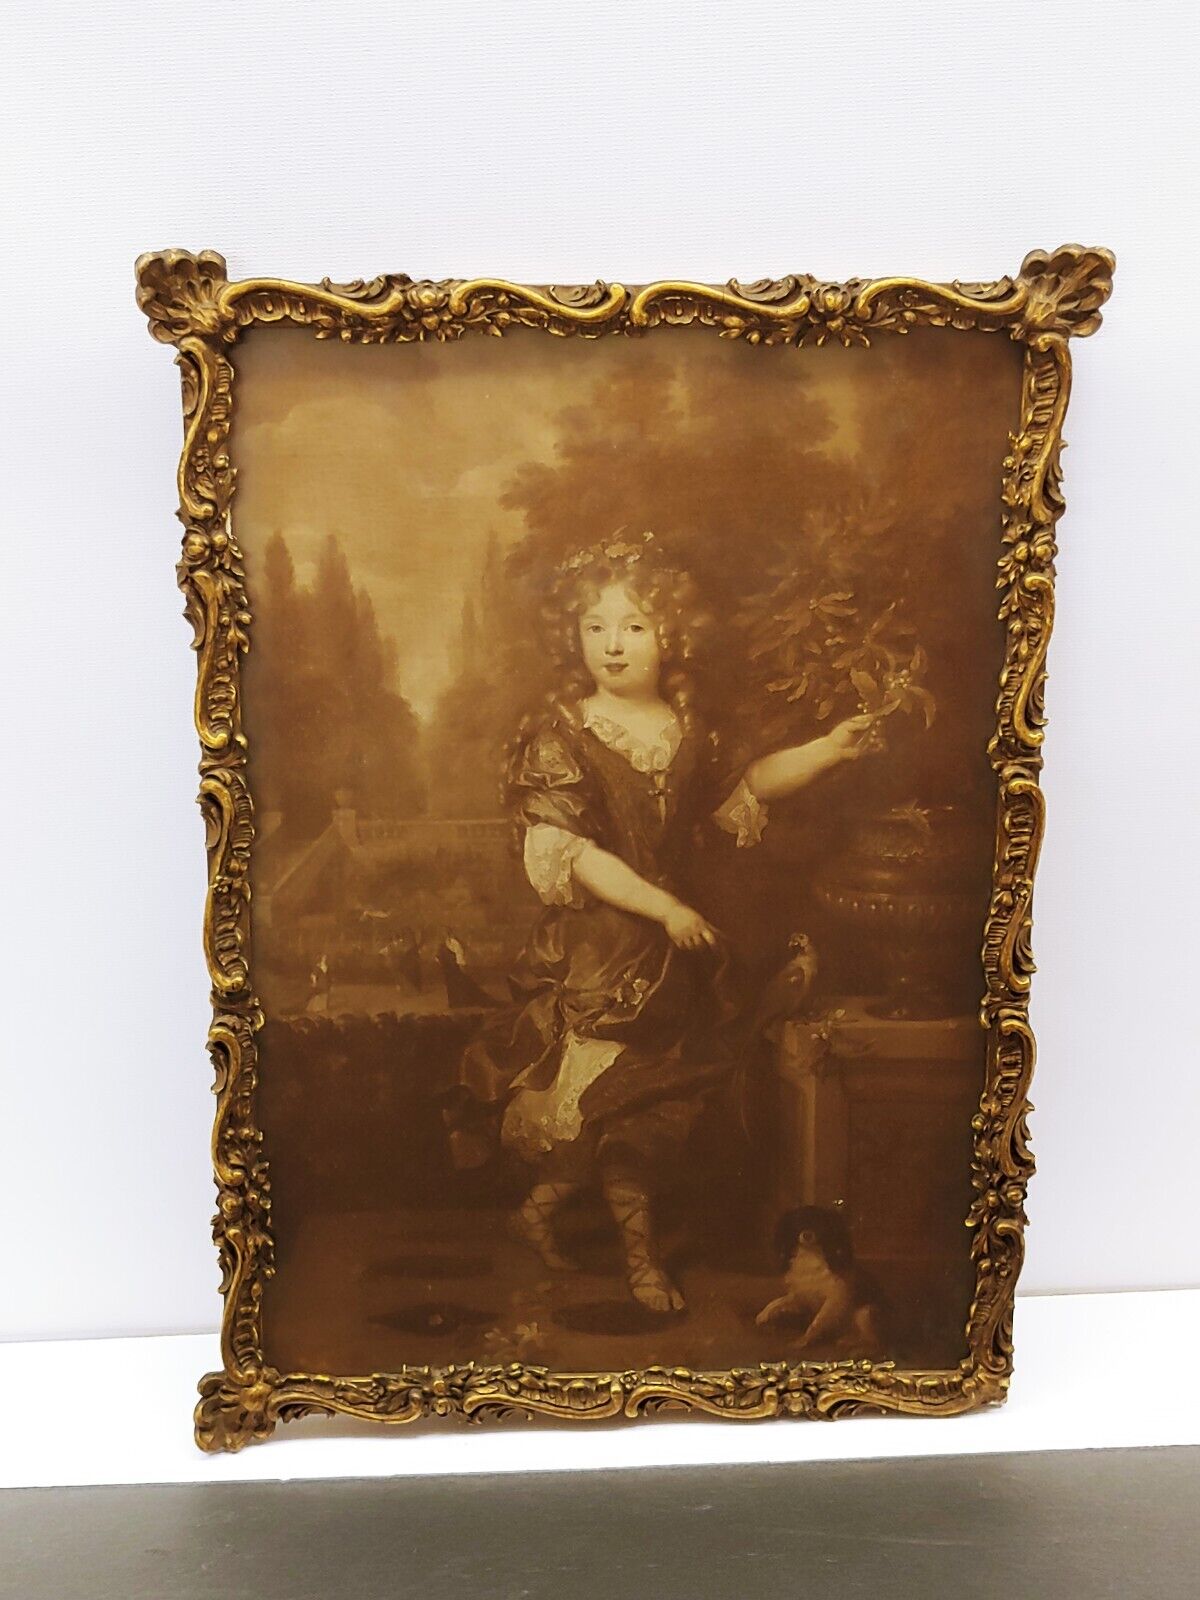 Antique Ornate Wood & Gesso Framed Photograph Of A Painting 16x12 G. Busse NYC